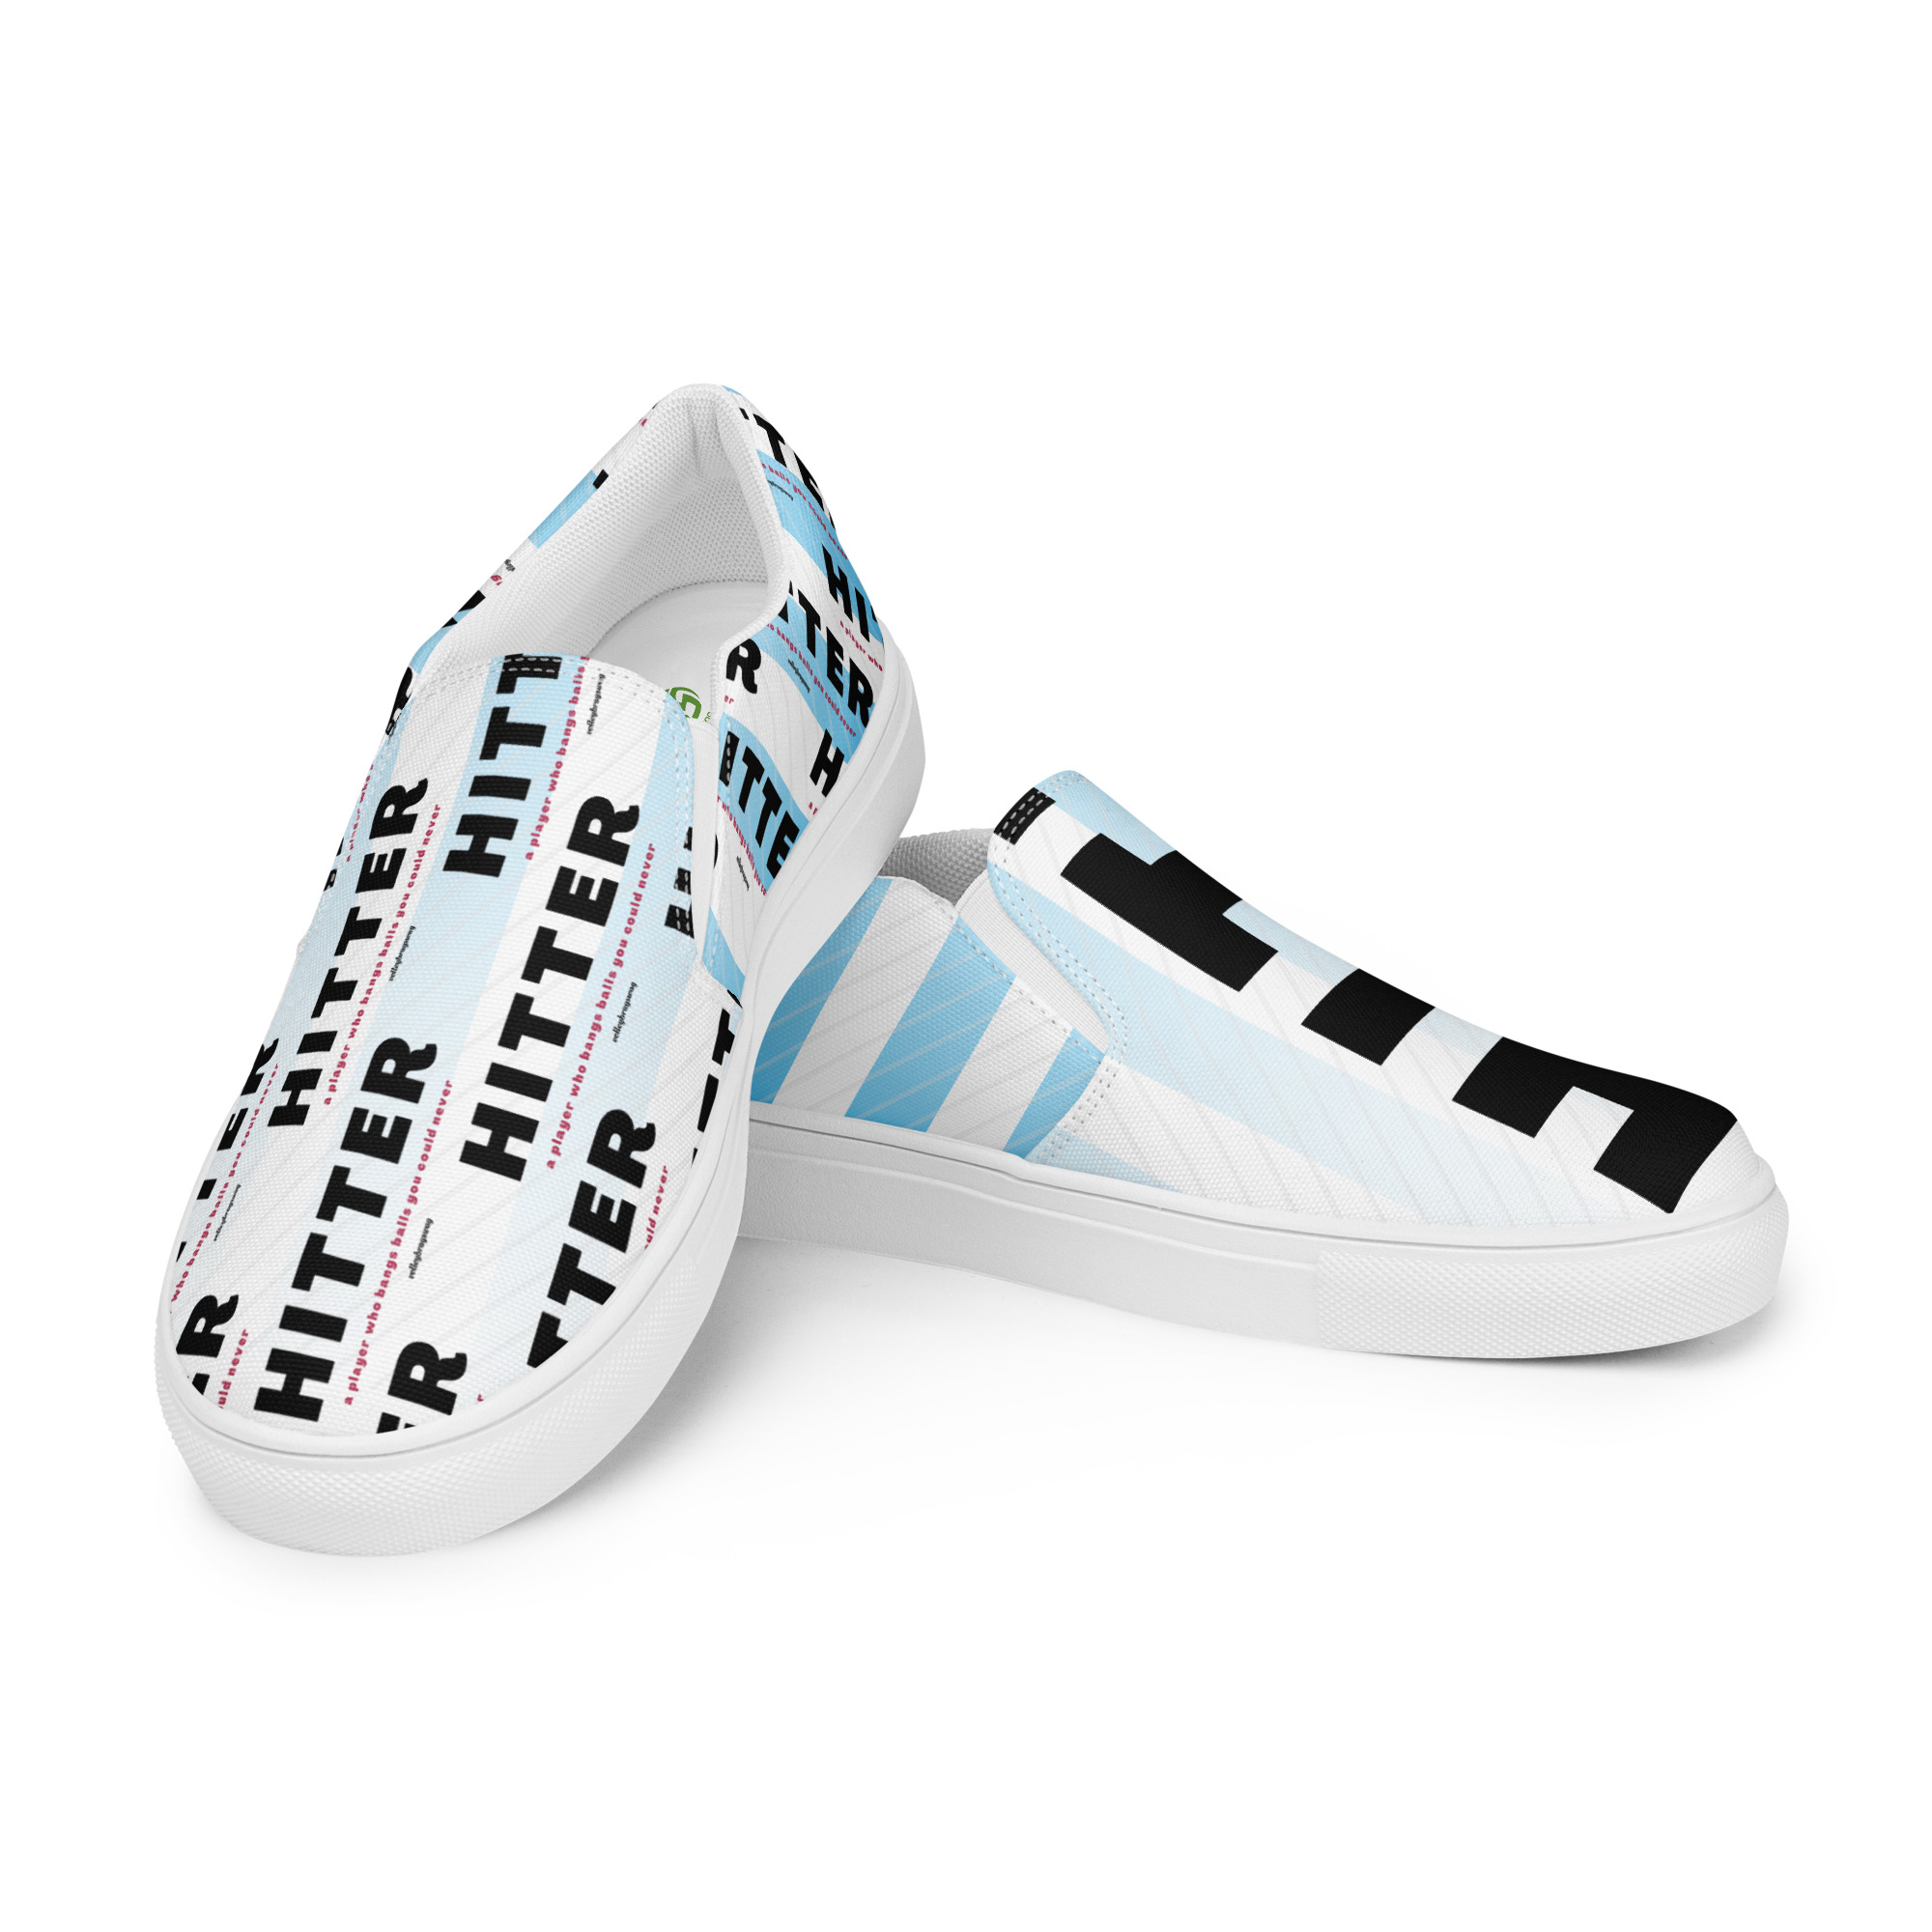 My HITTER womens canvas slip on shoes are the kicks for this summer, perfect for indoor and beach players..the ones that easily fit in your Volleybragswag gym bag and go stylishly from sand court or indoor court to the car and back.